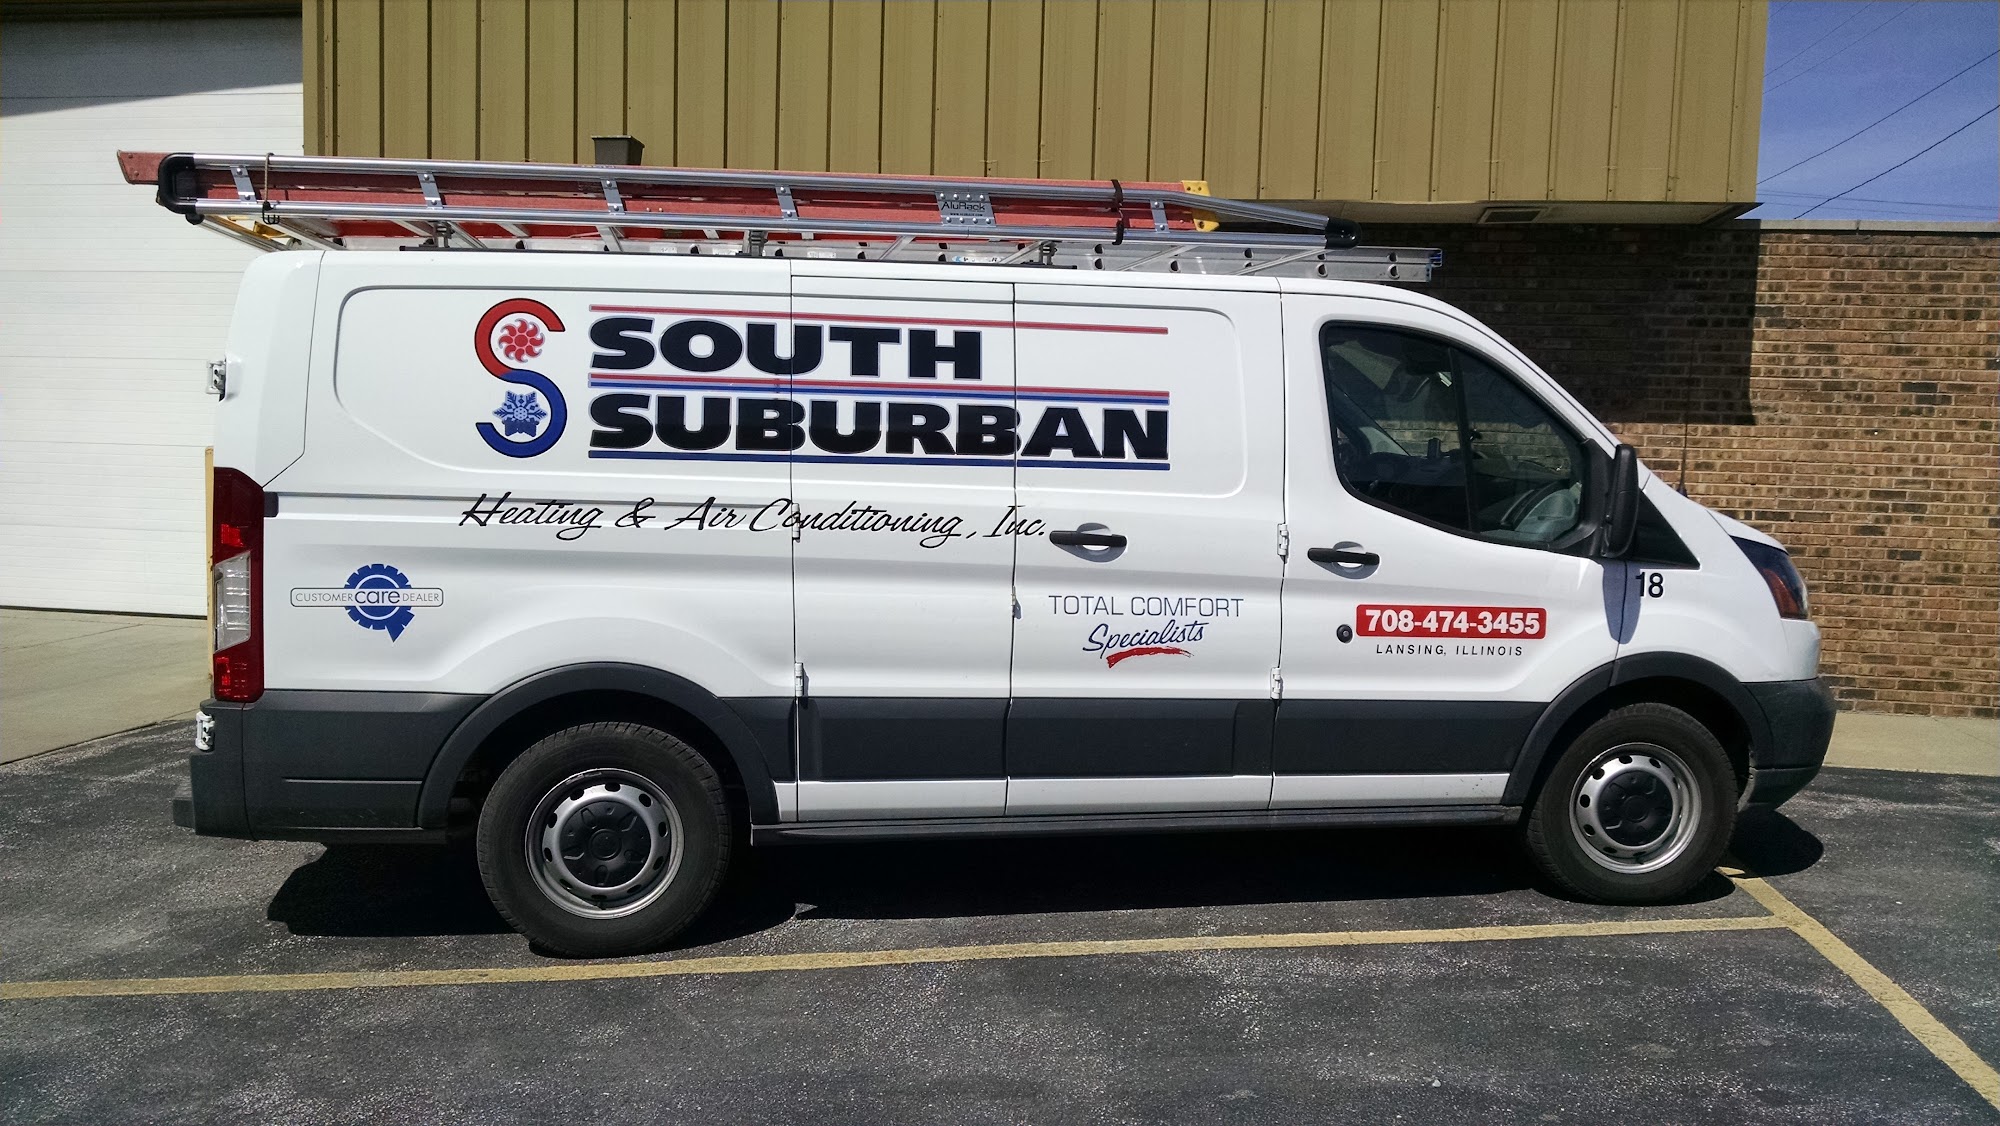 South Suburban Heating & Air Conditioning, Inc.